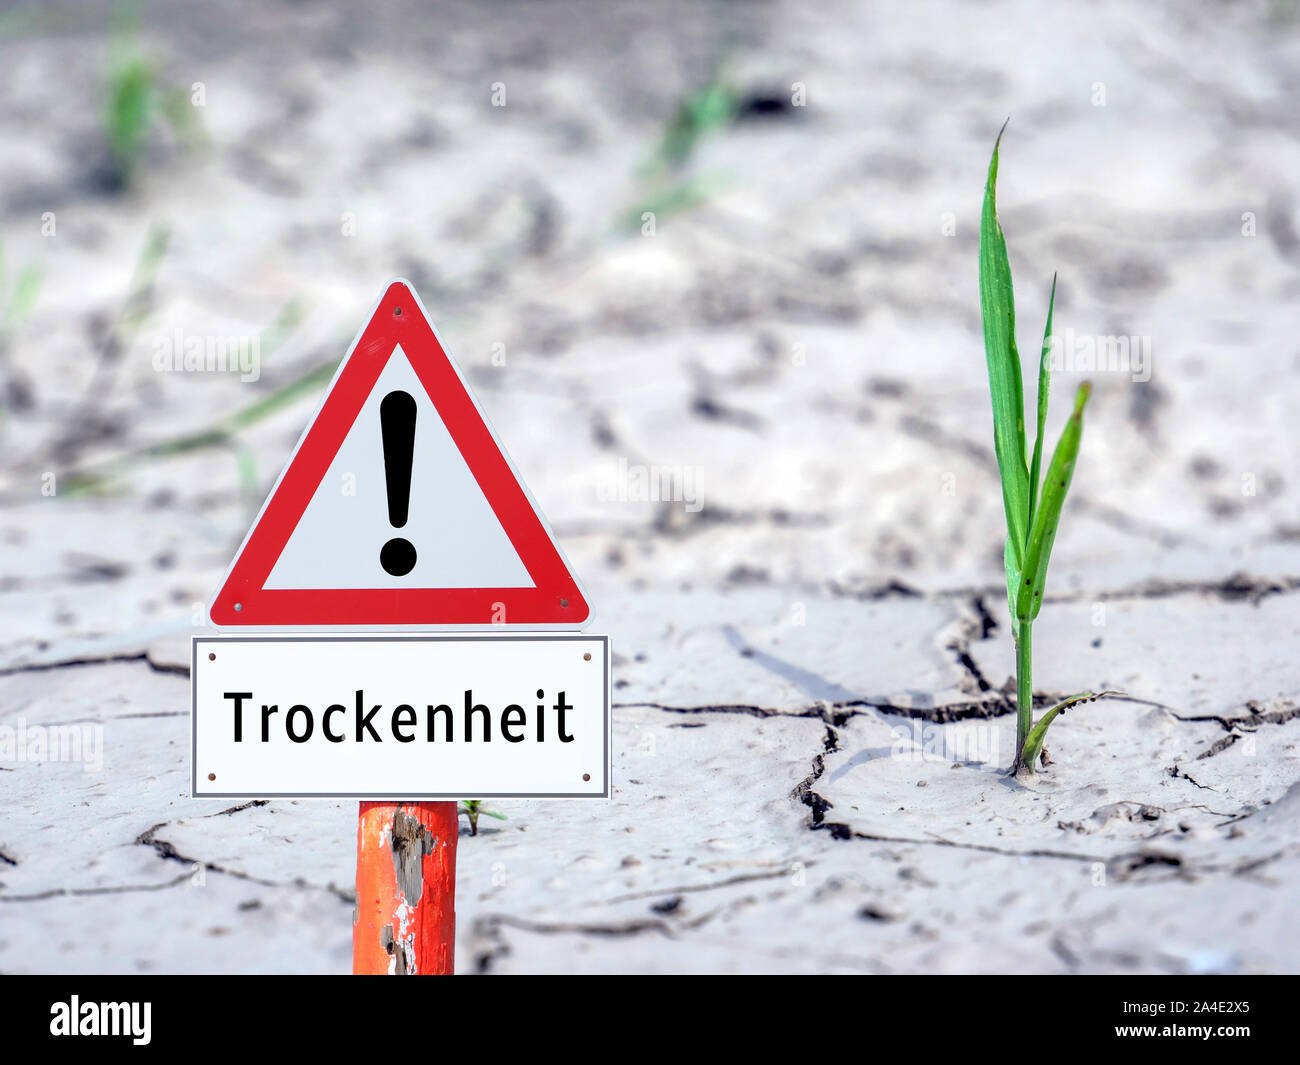 Drought warning sign in German Stock Photo